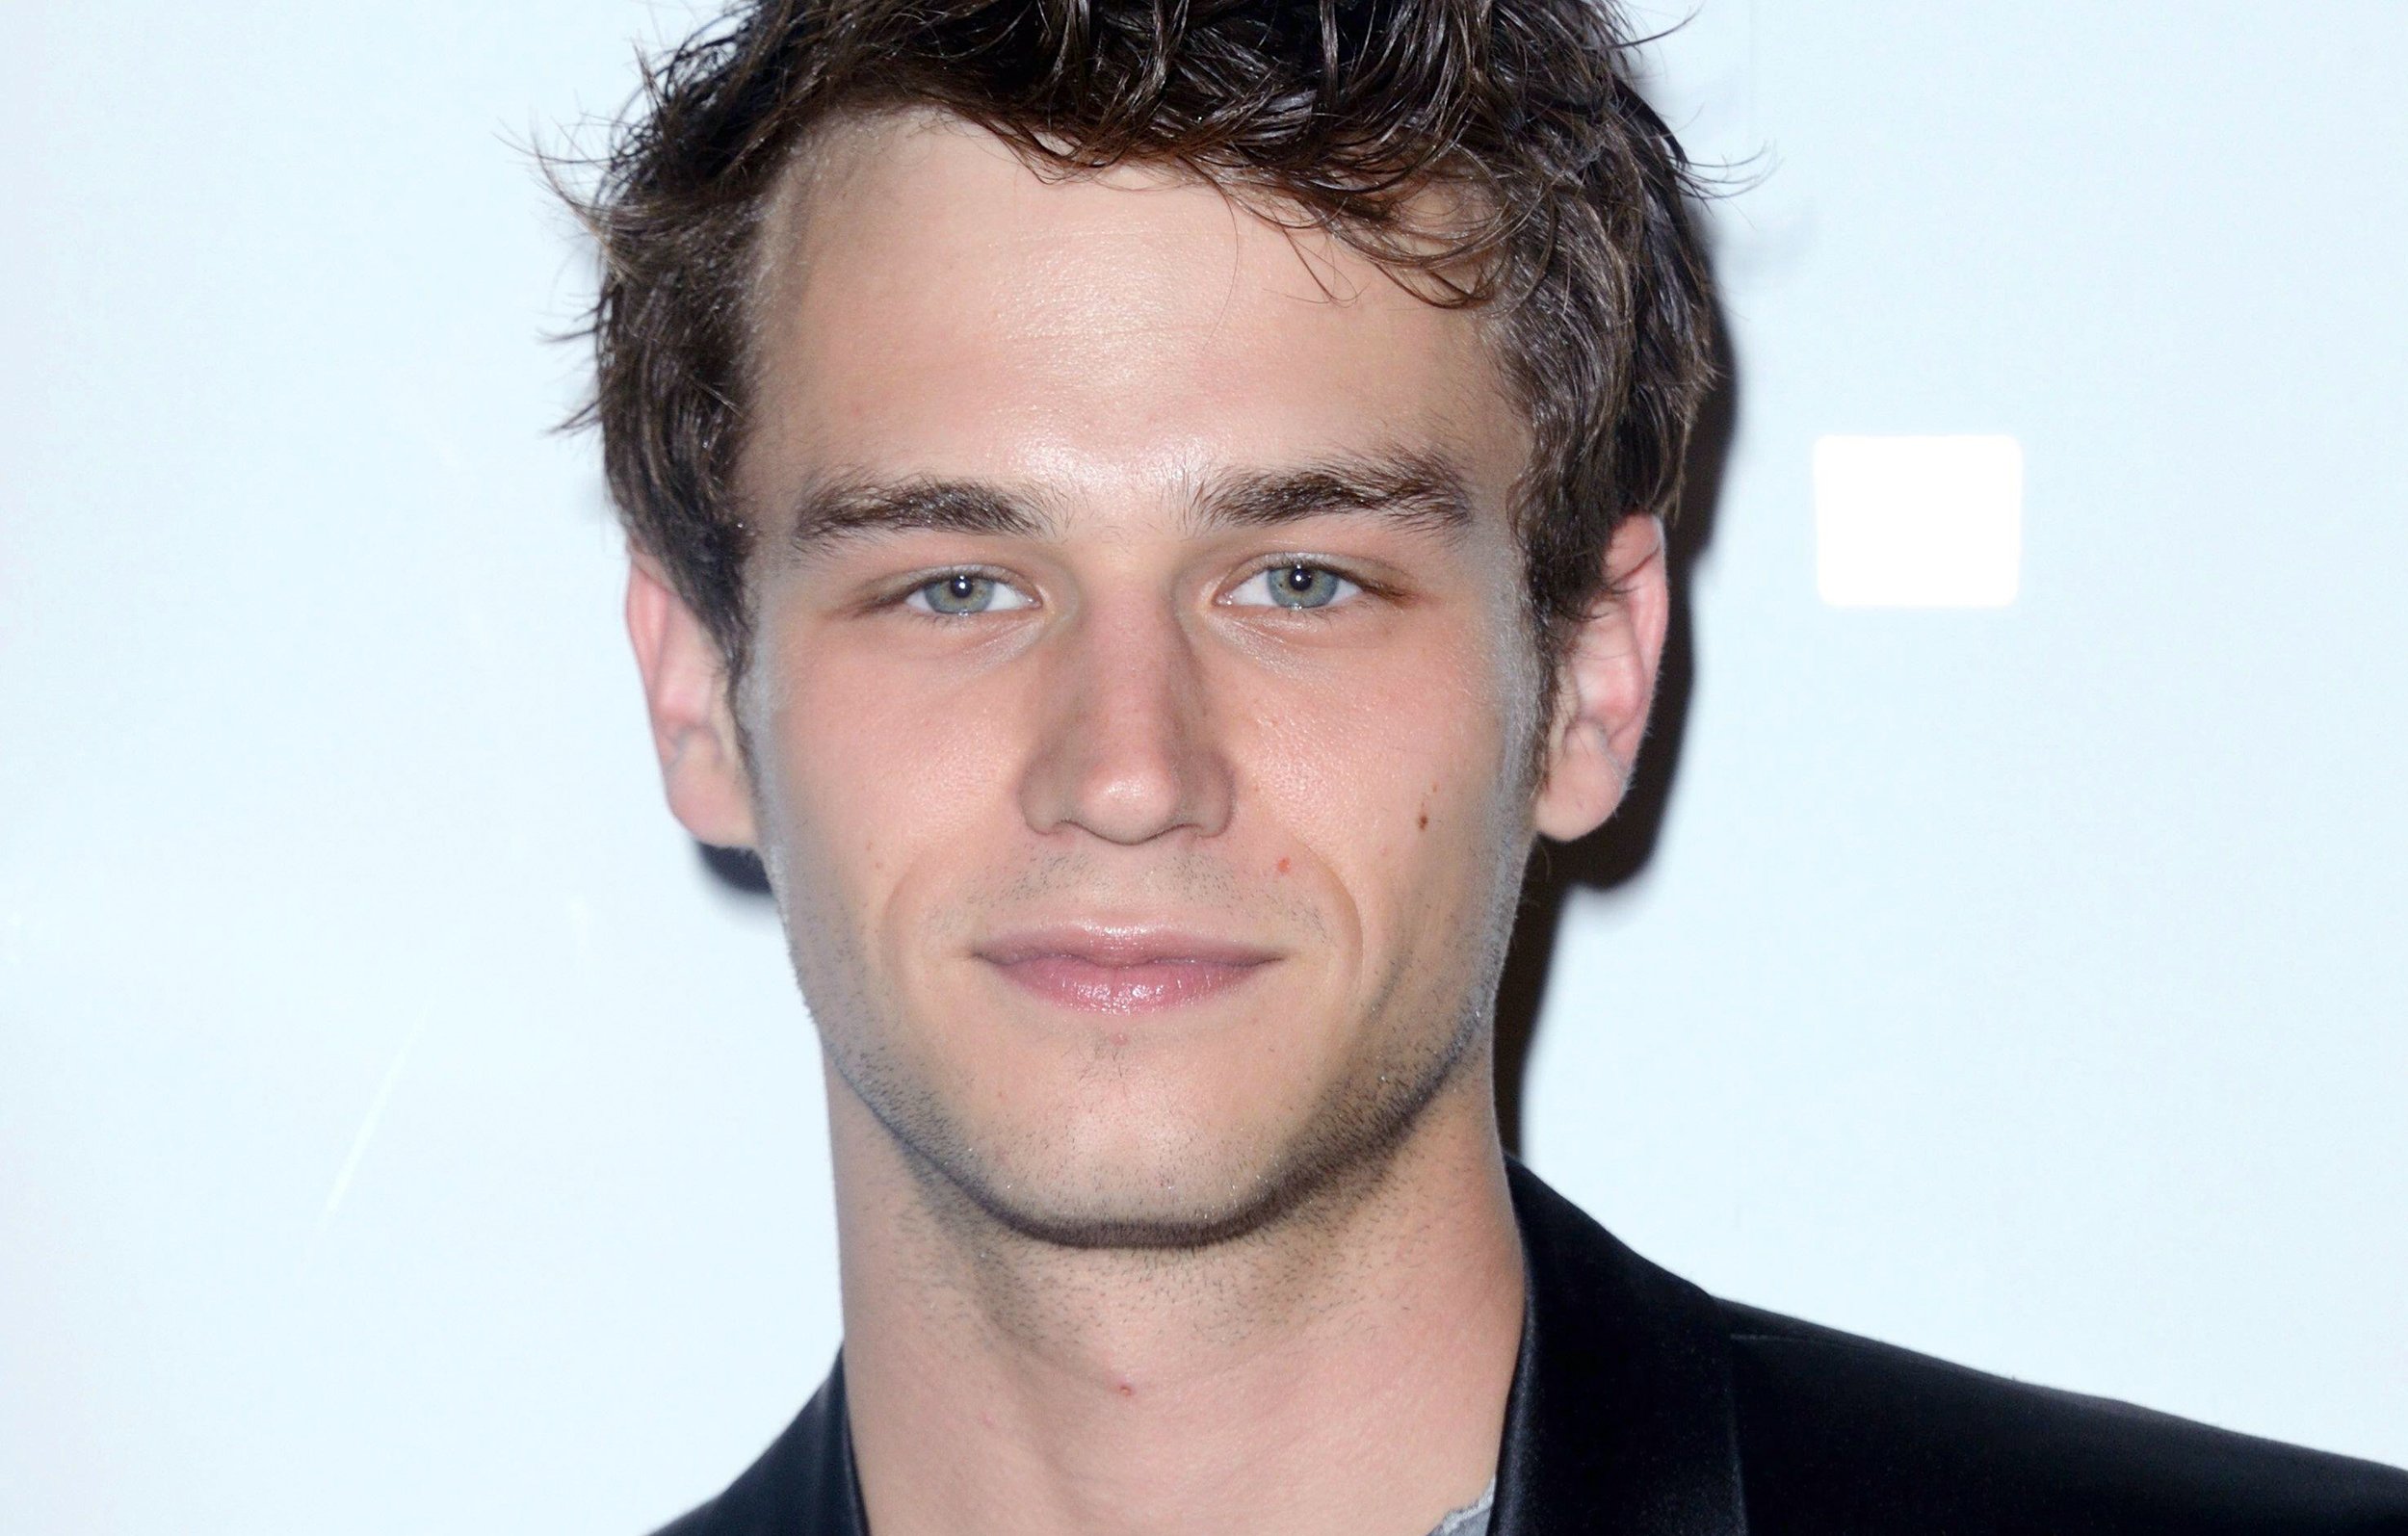 Brandon Flynn's age is 29, and his height is allegedly 5'11"